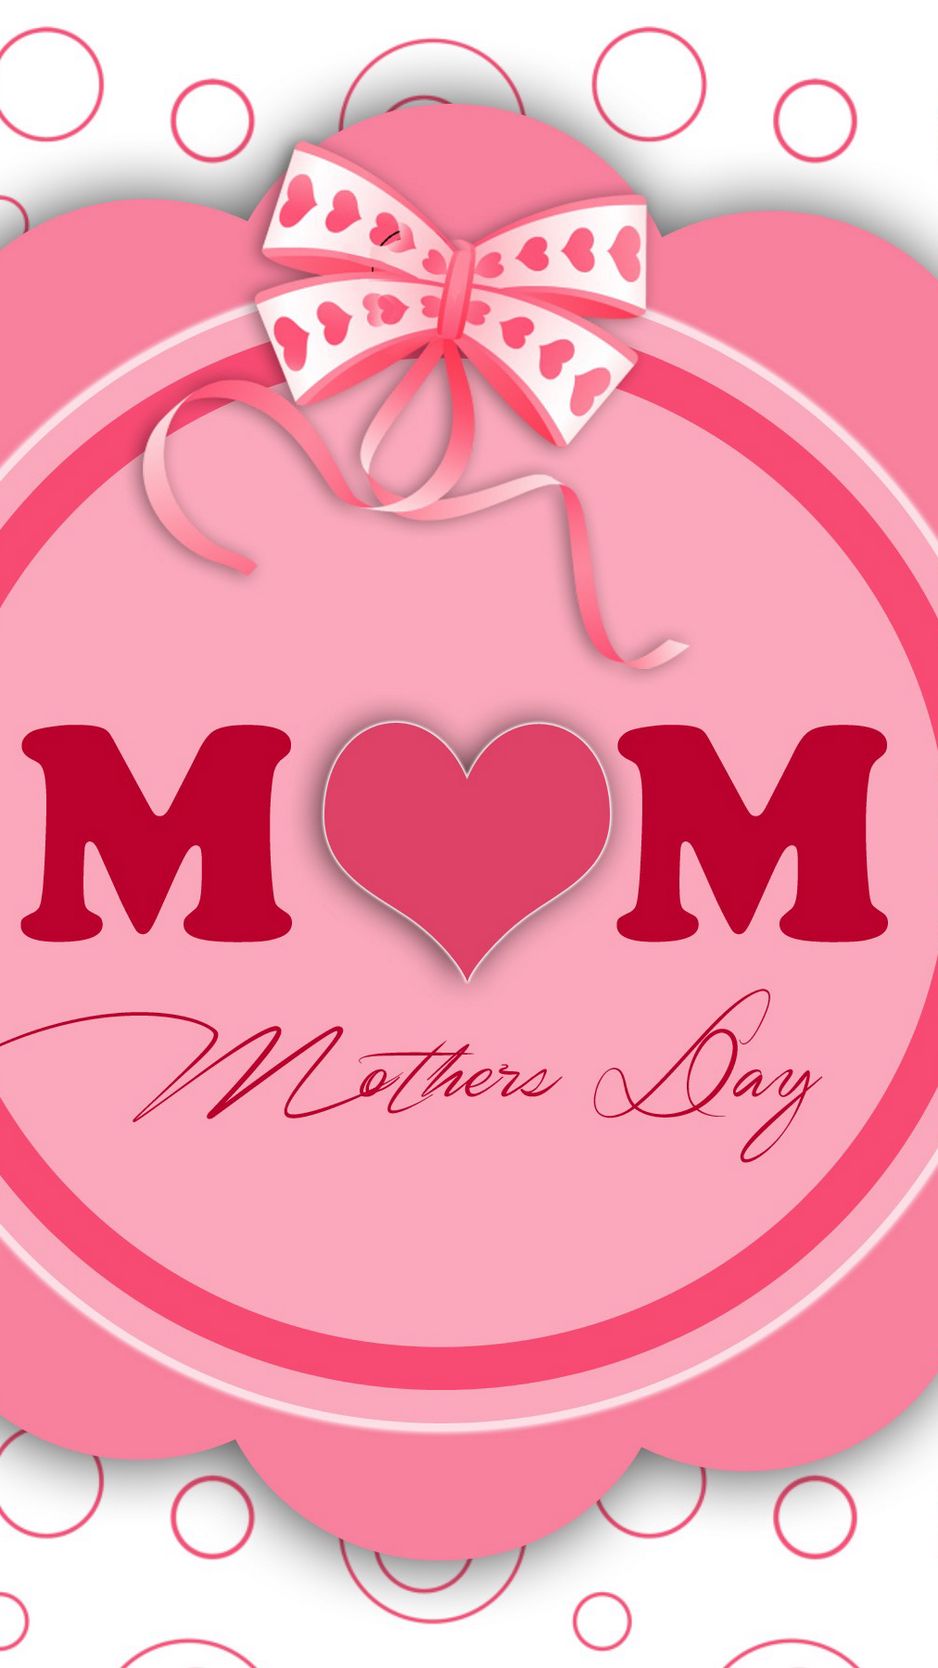 Wallpaper Mothers Day Card